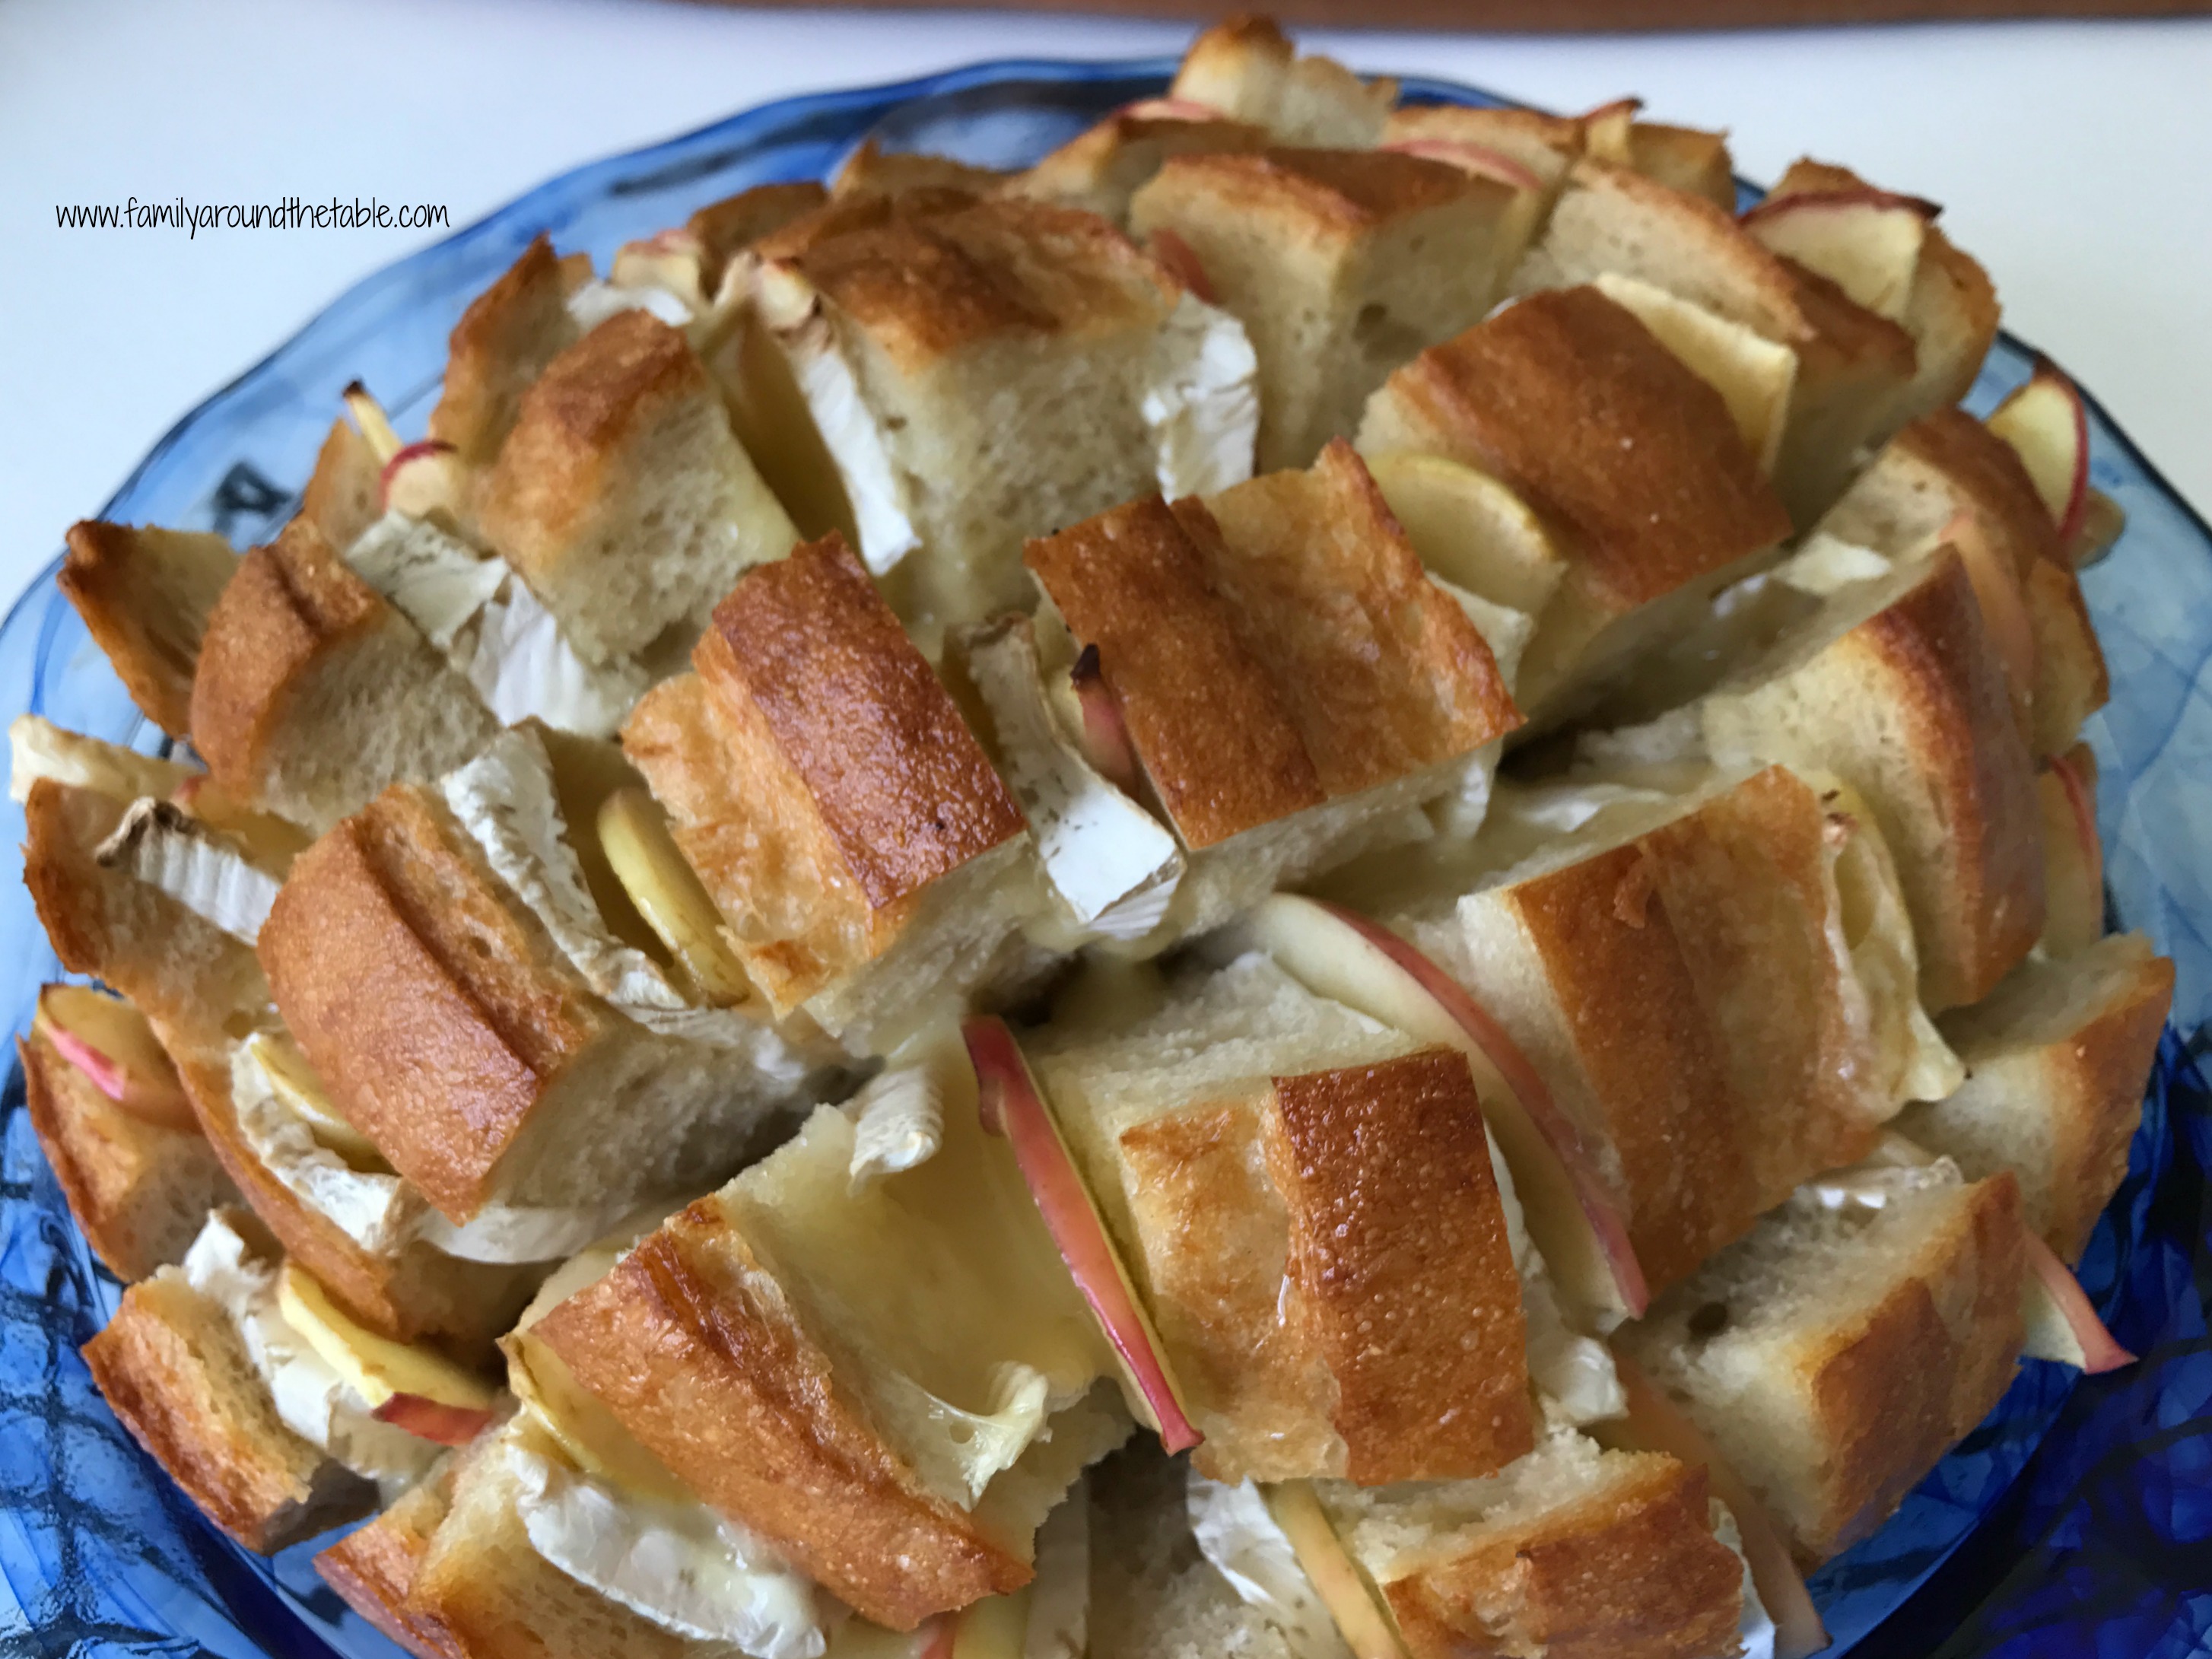 Cheesy Brie and Apple Pull Apart Bread in a blue plate.